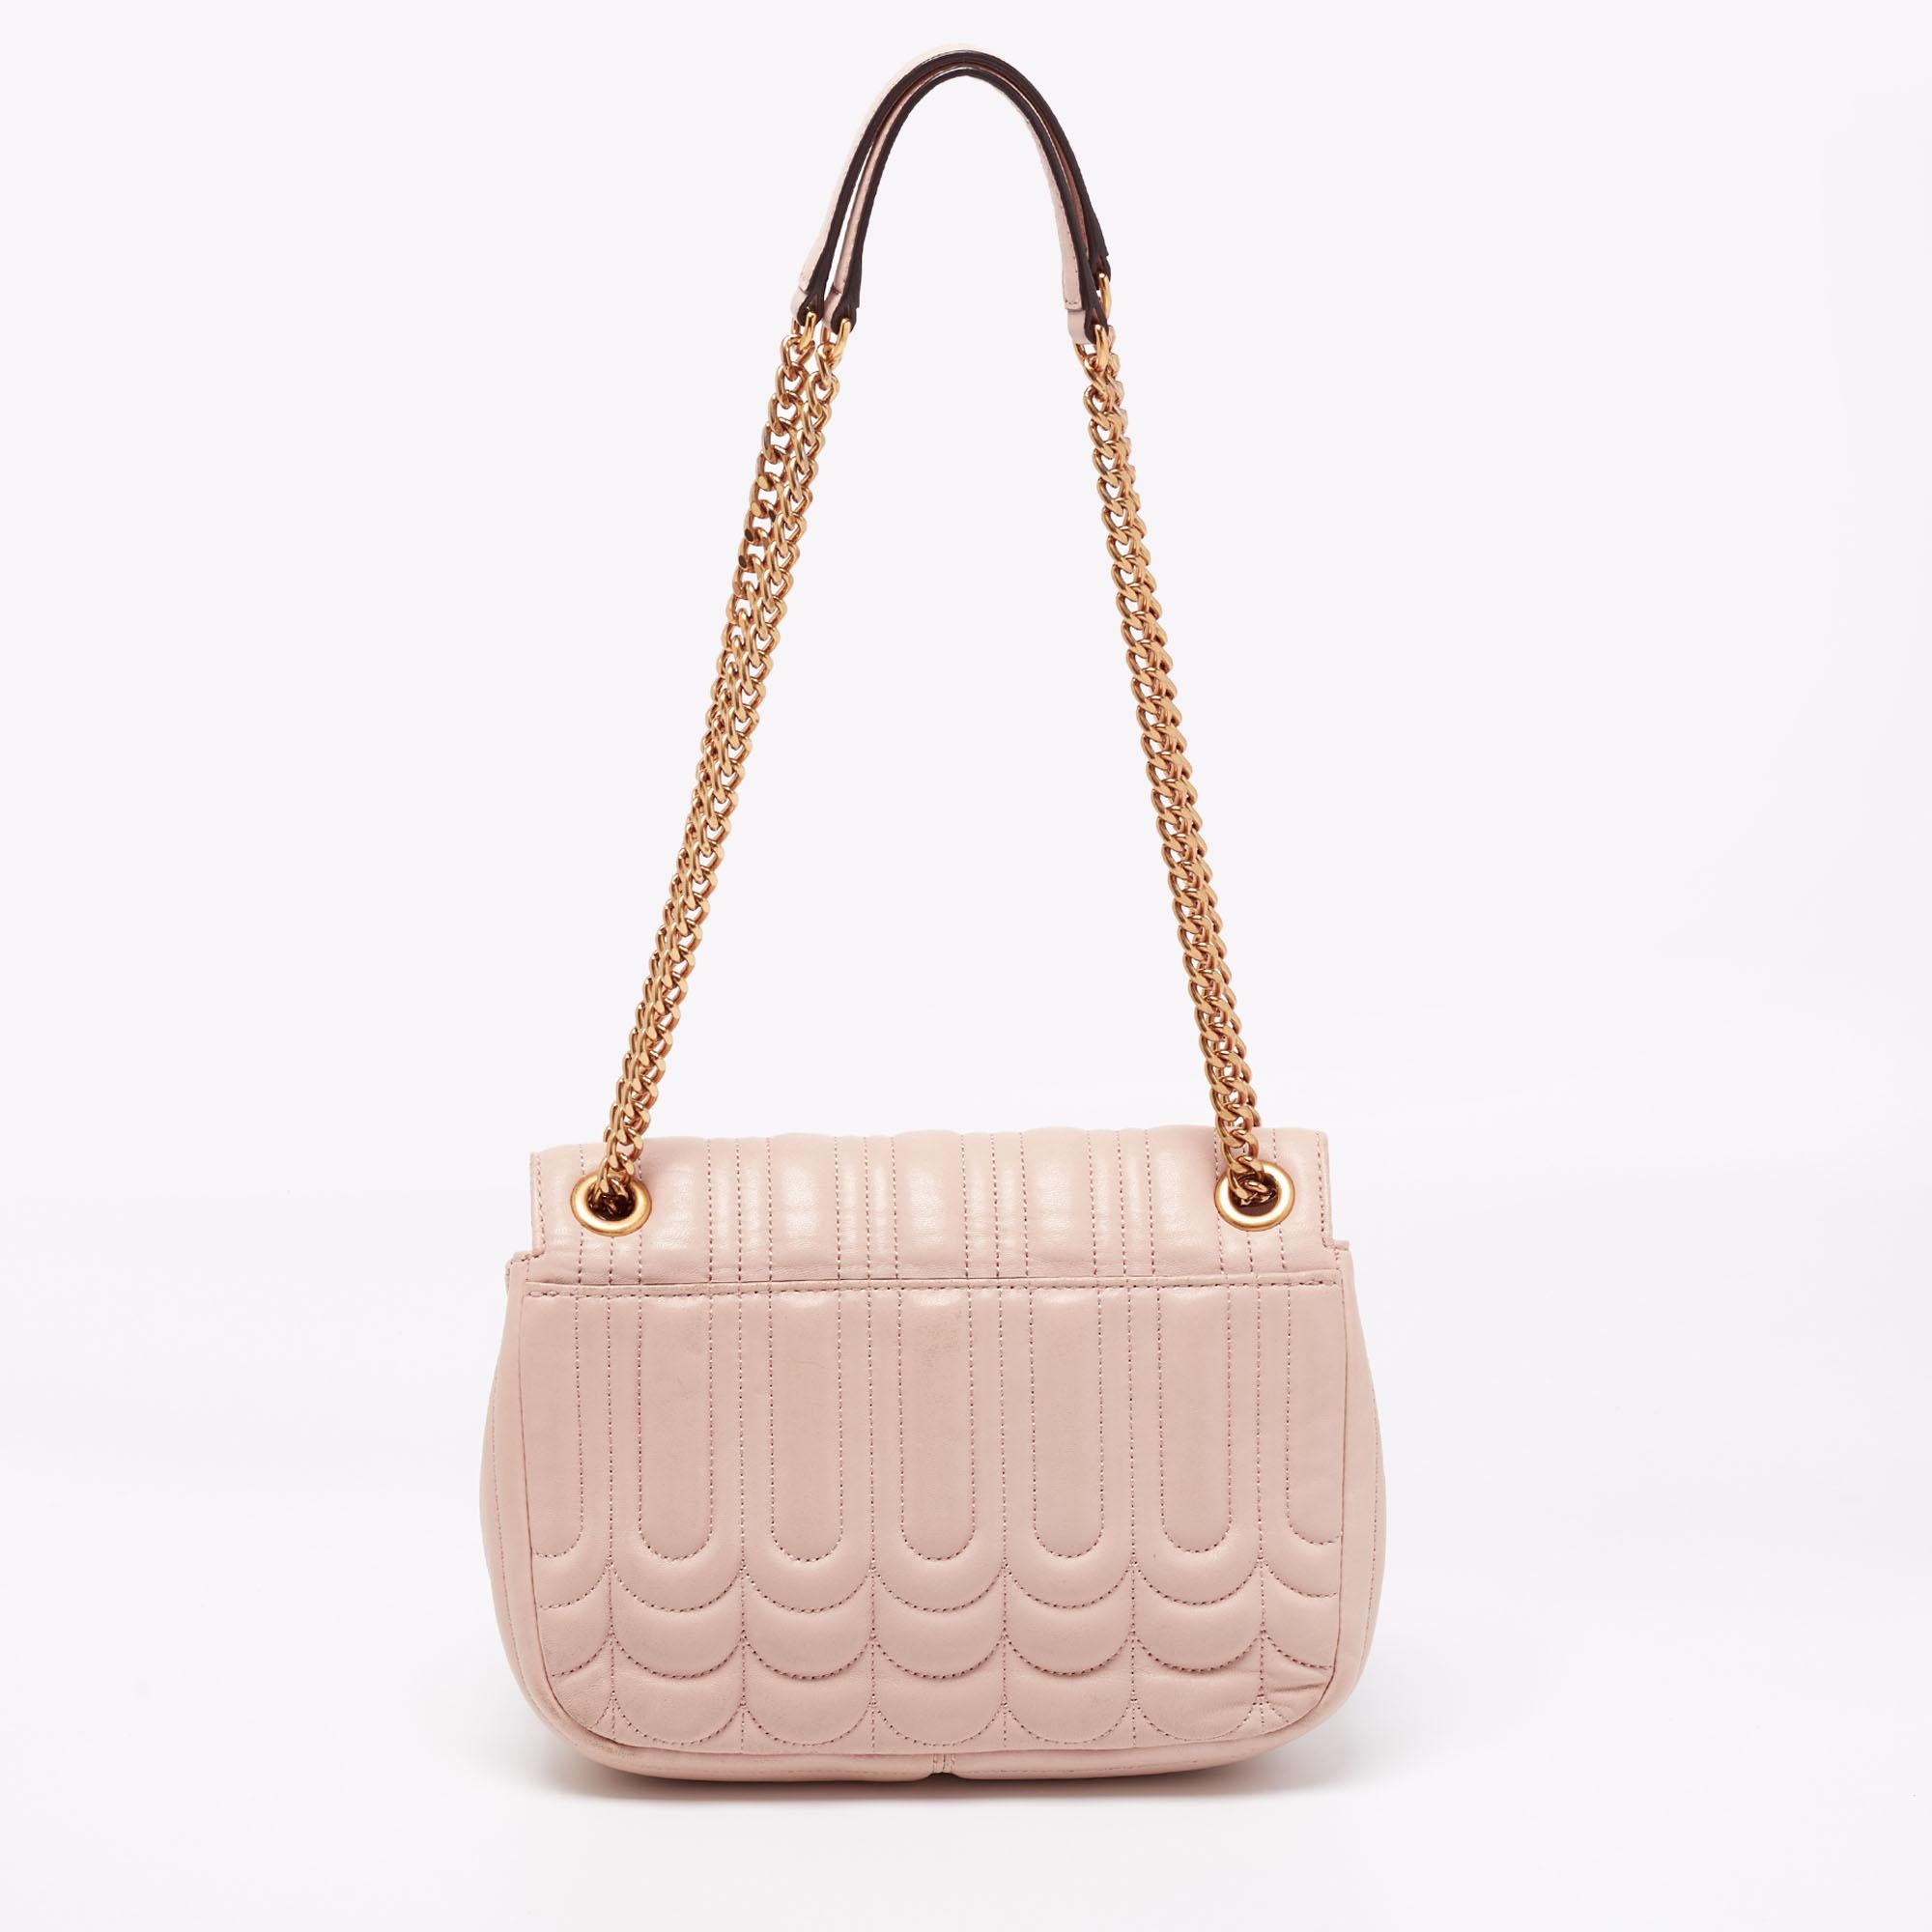 Anyone who loves handbags wants to own one from Michael Kors. This classic shoulder bag from their Vivianne collection is made from dusty pink, floral quilted leather. It has a gold-tone closure with the brand's name on it and chain handles with a